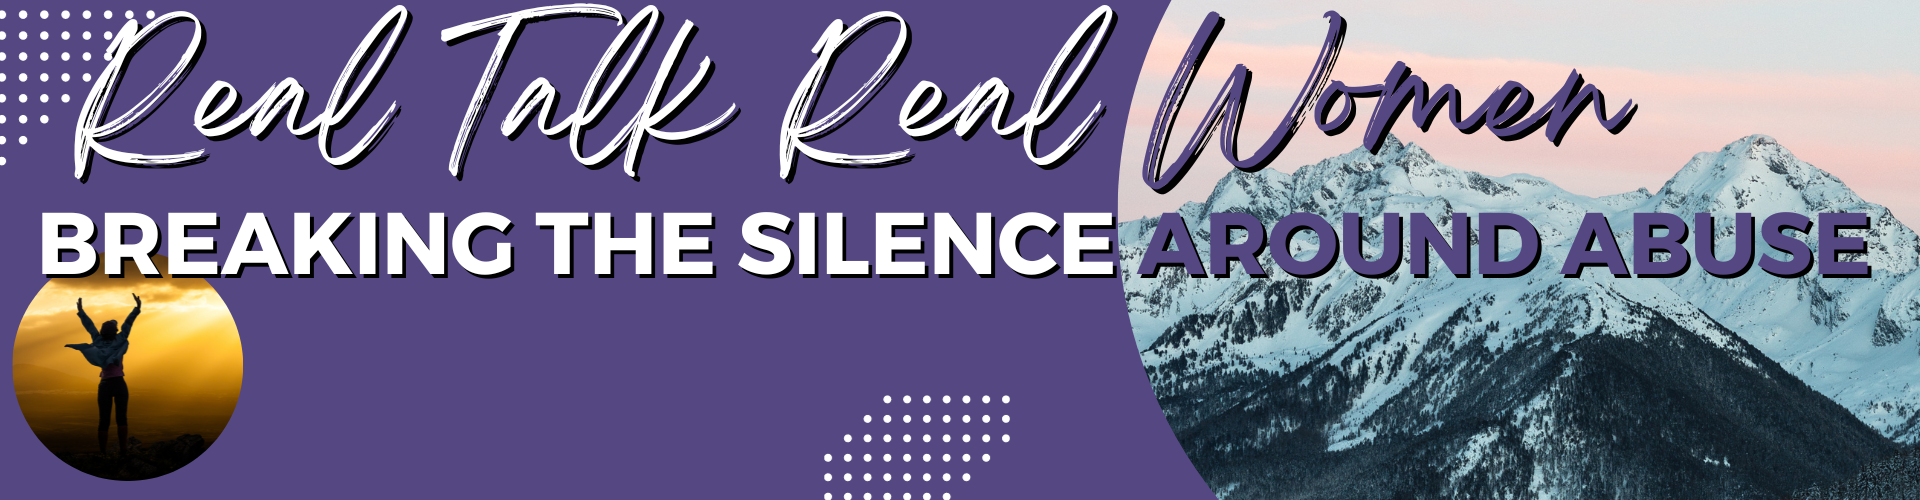 Real Talk Real Women Breaking The Silence Around Abuse